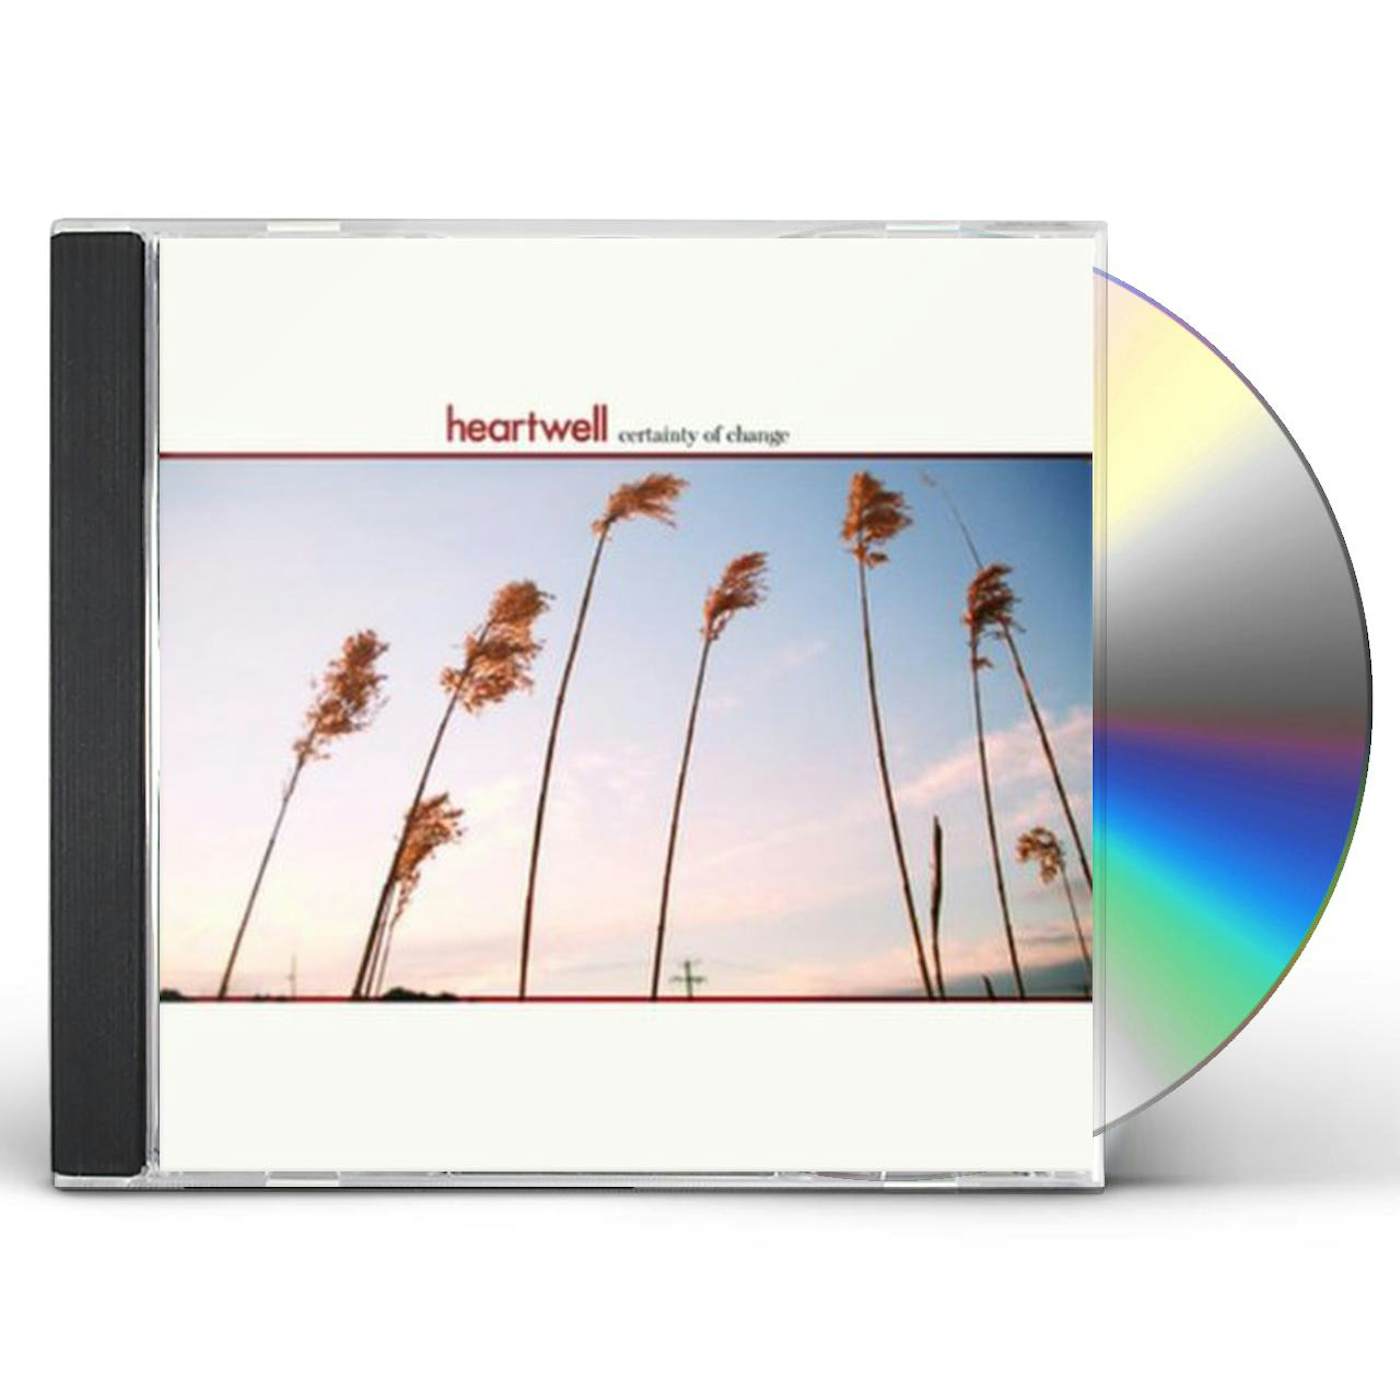 Heartwell CERTAINTY OF CHANGE CD